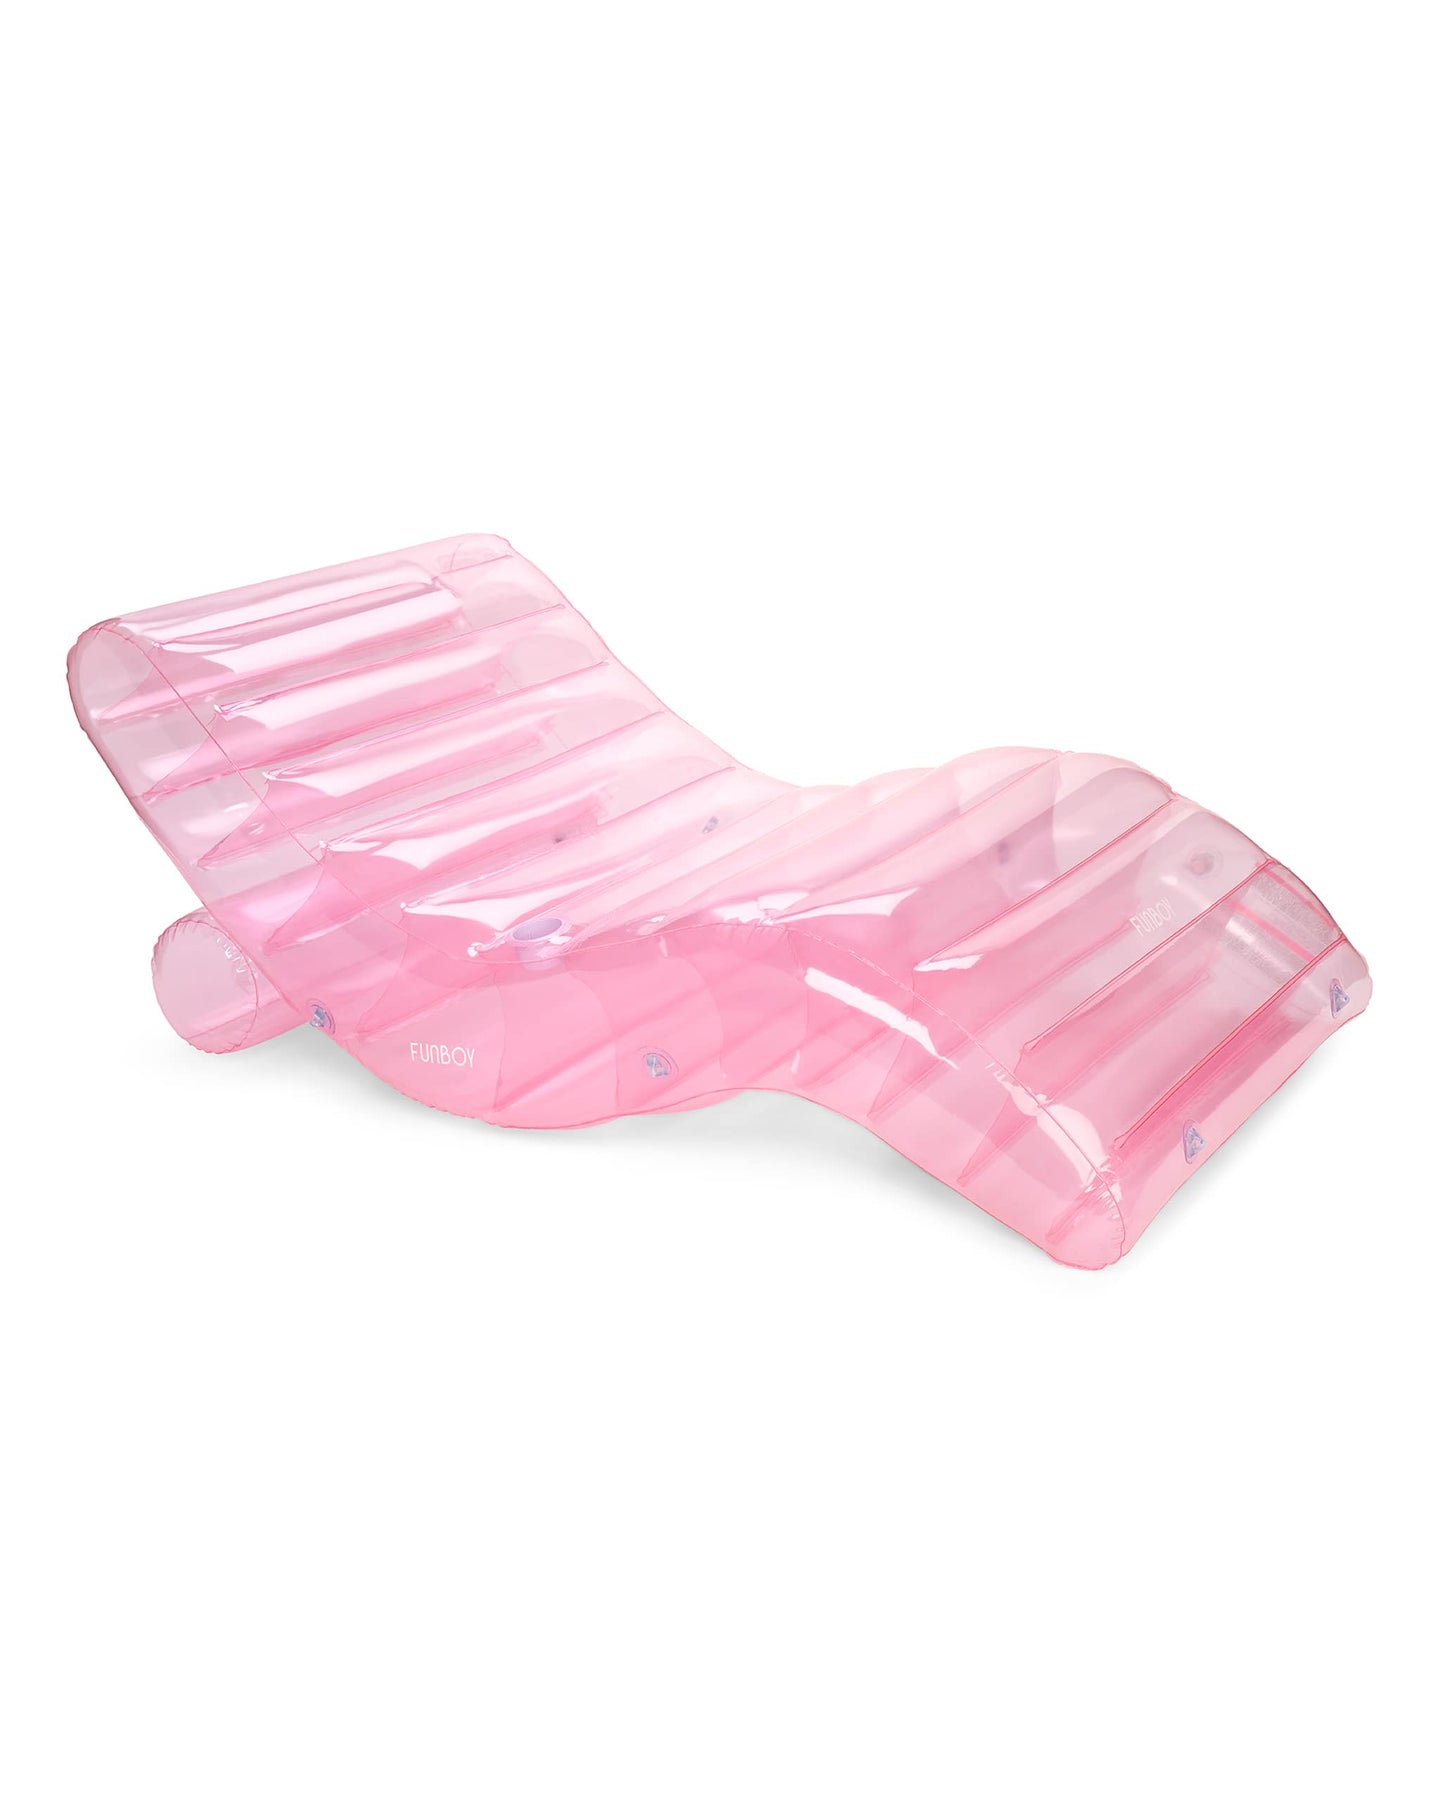 Clear Pink Chaise Lounger Pool Float